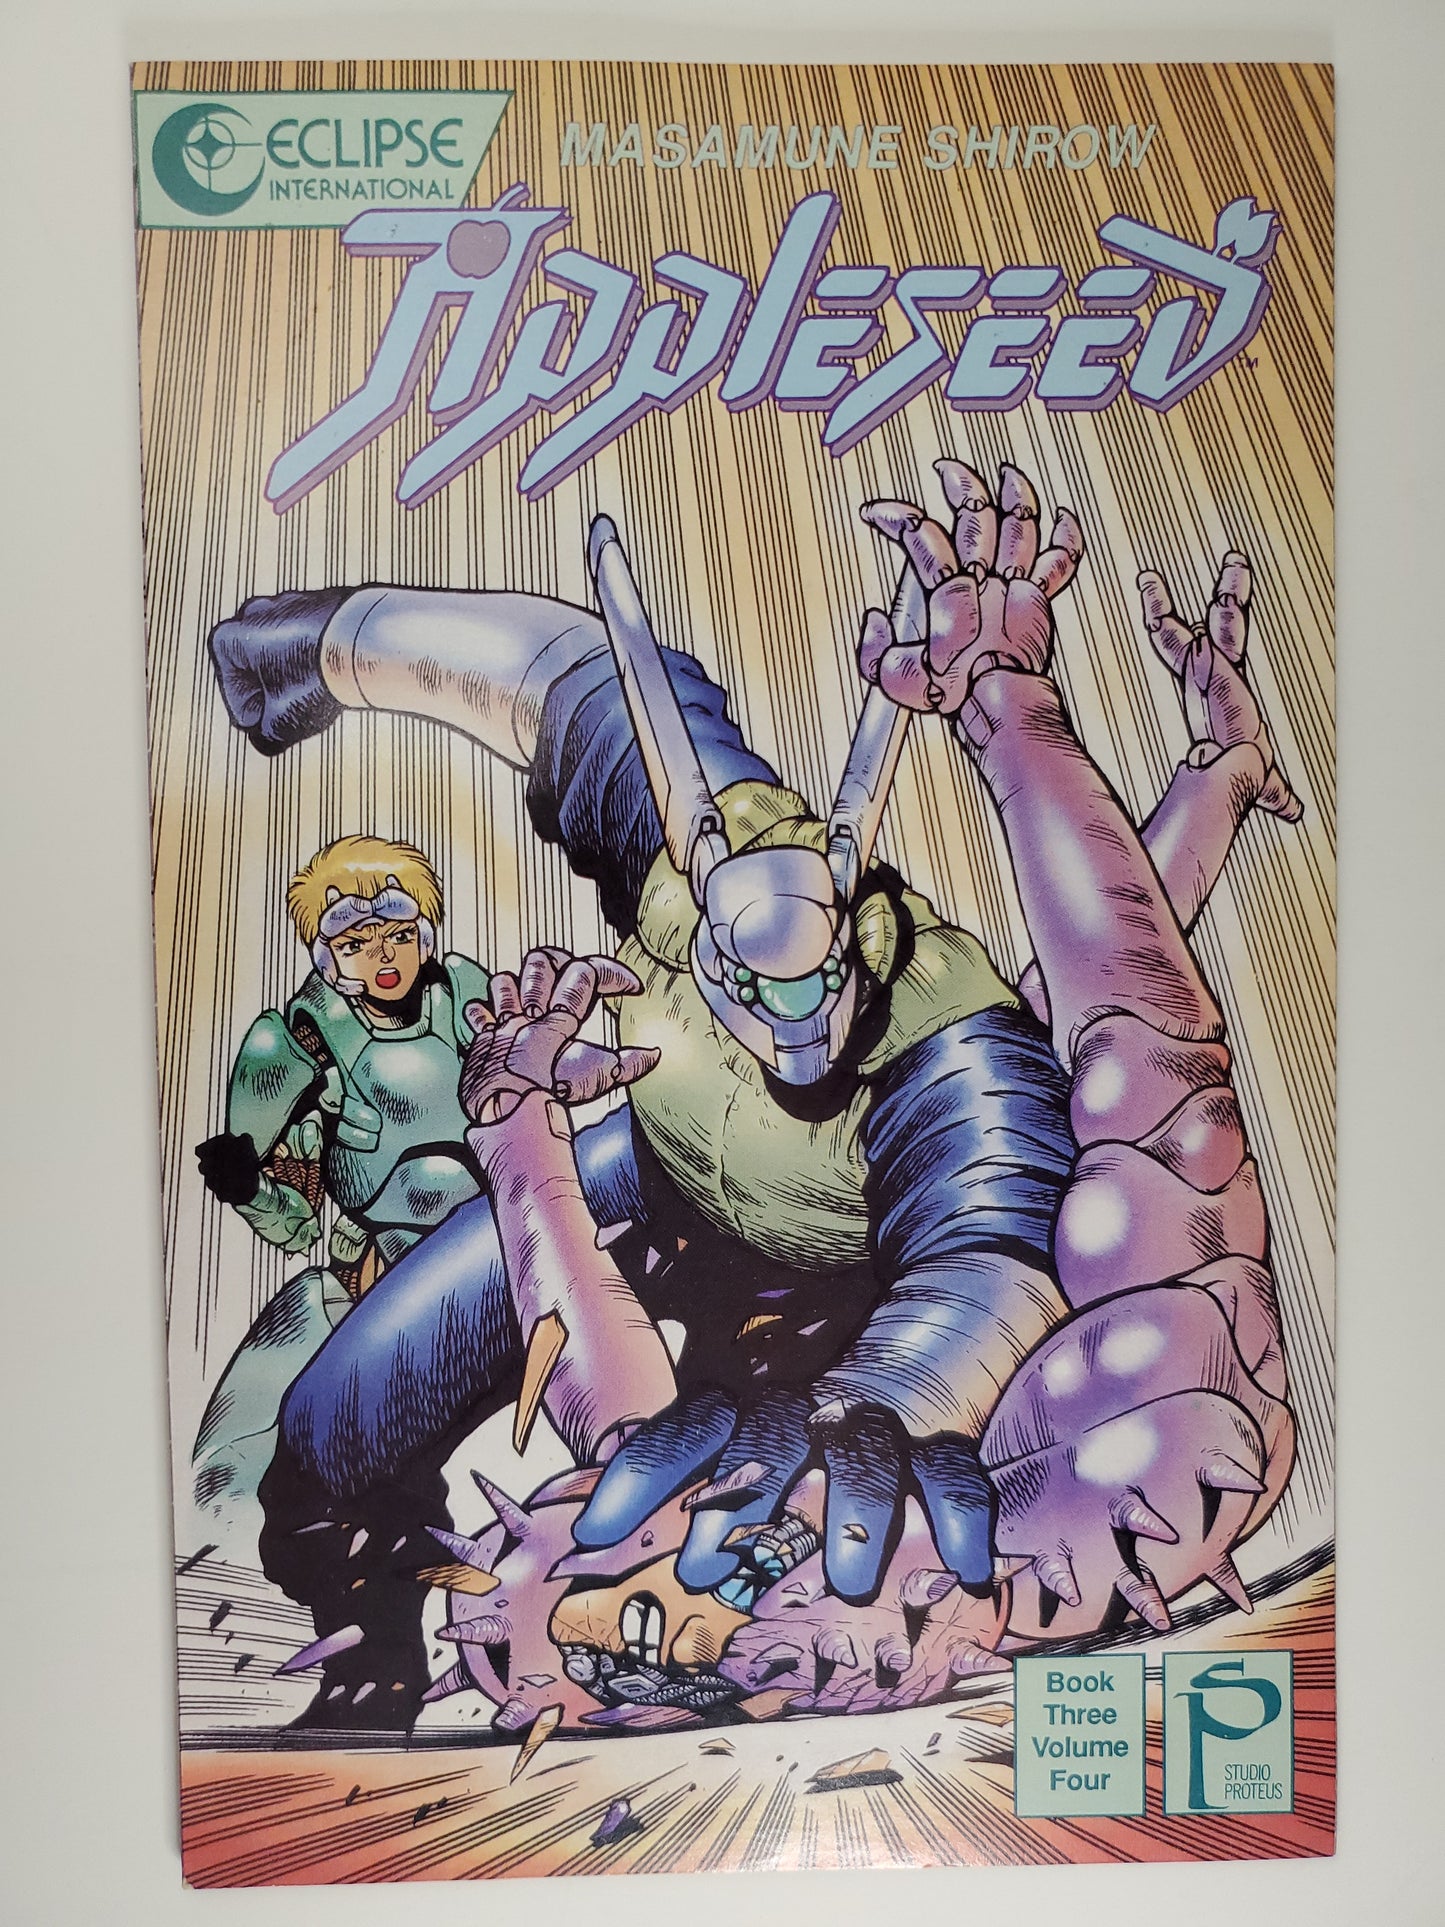 Eclipse Appleseed Vol 4 #3 Shirow